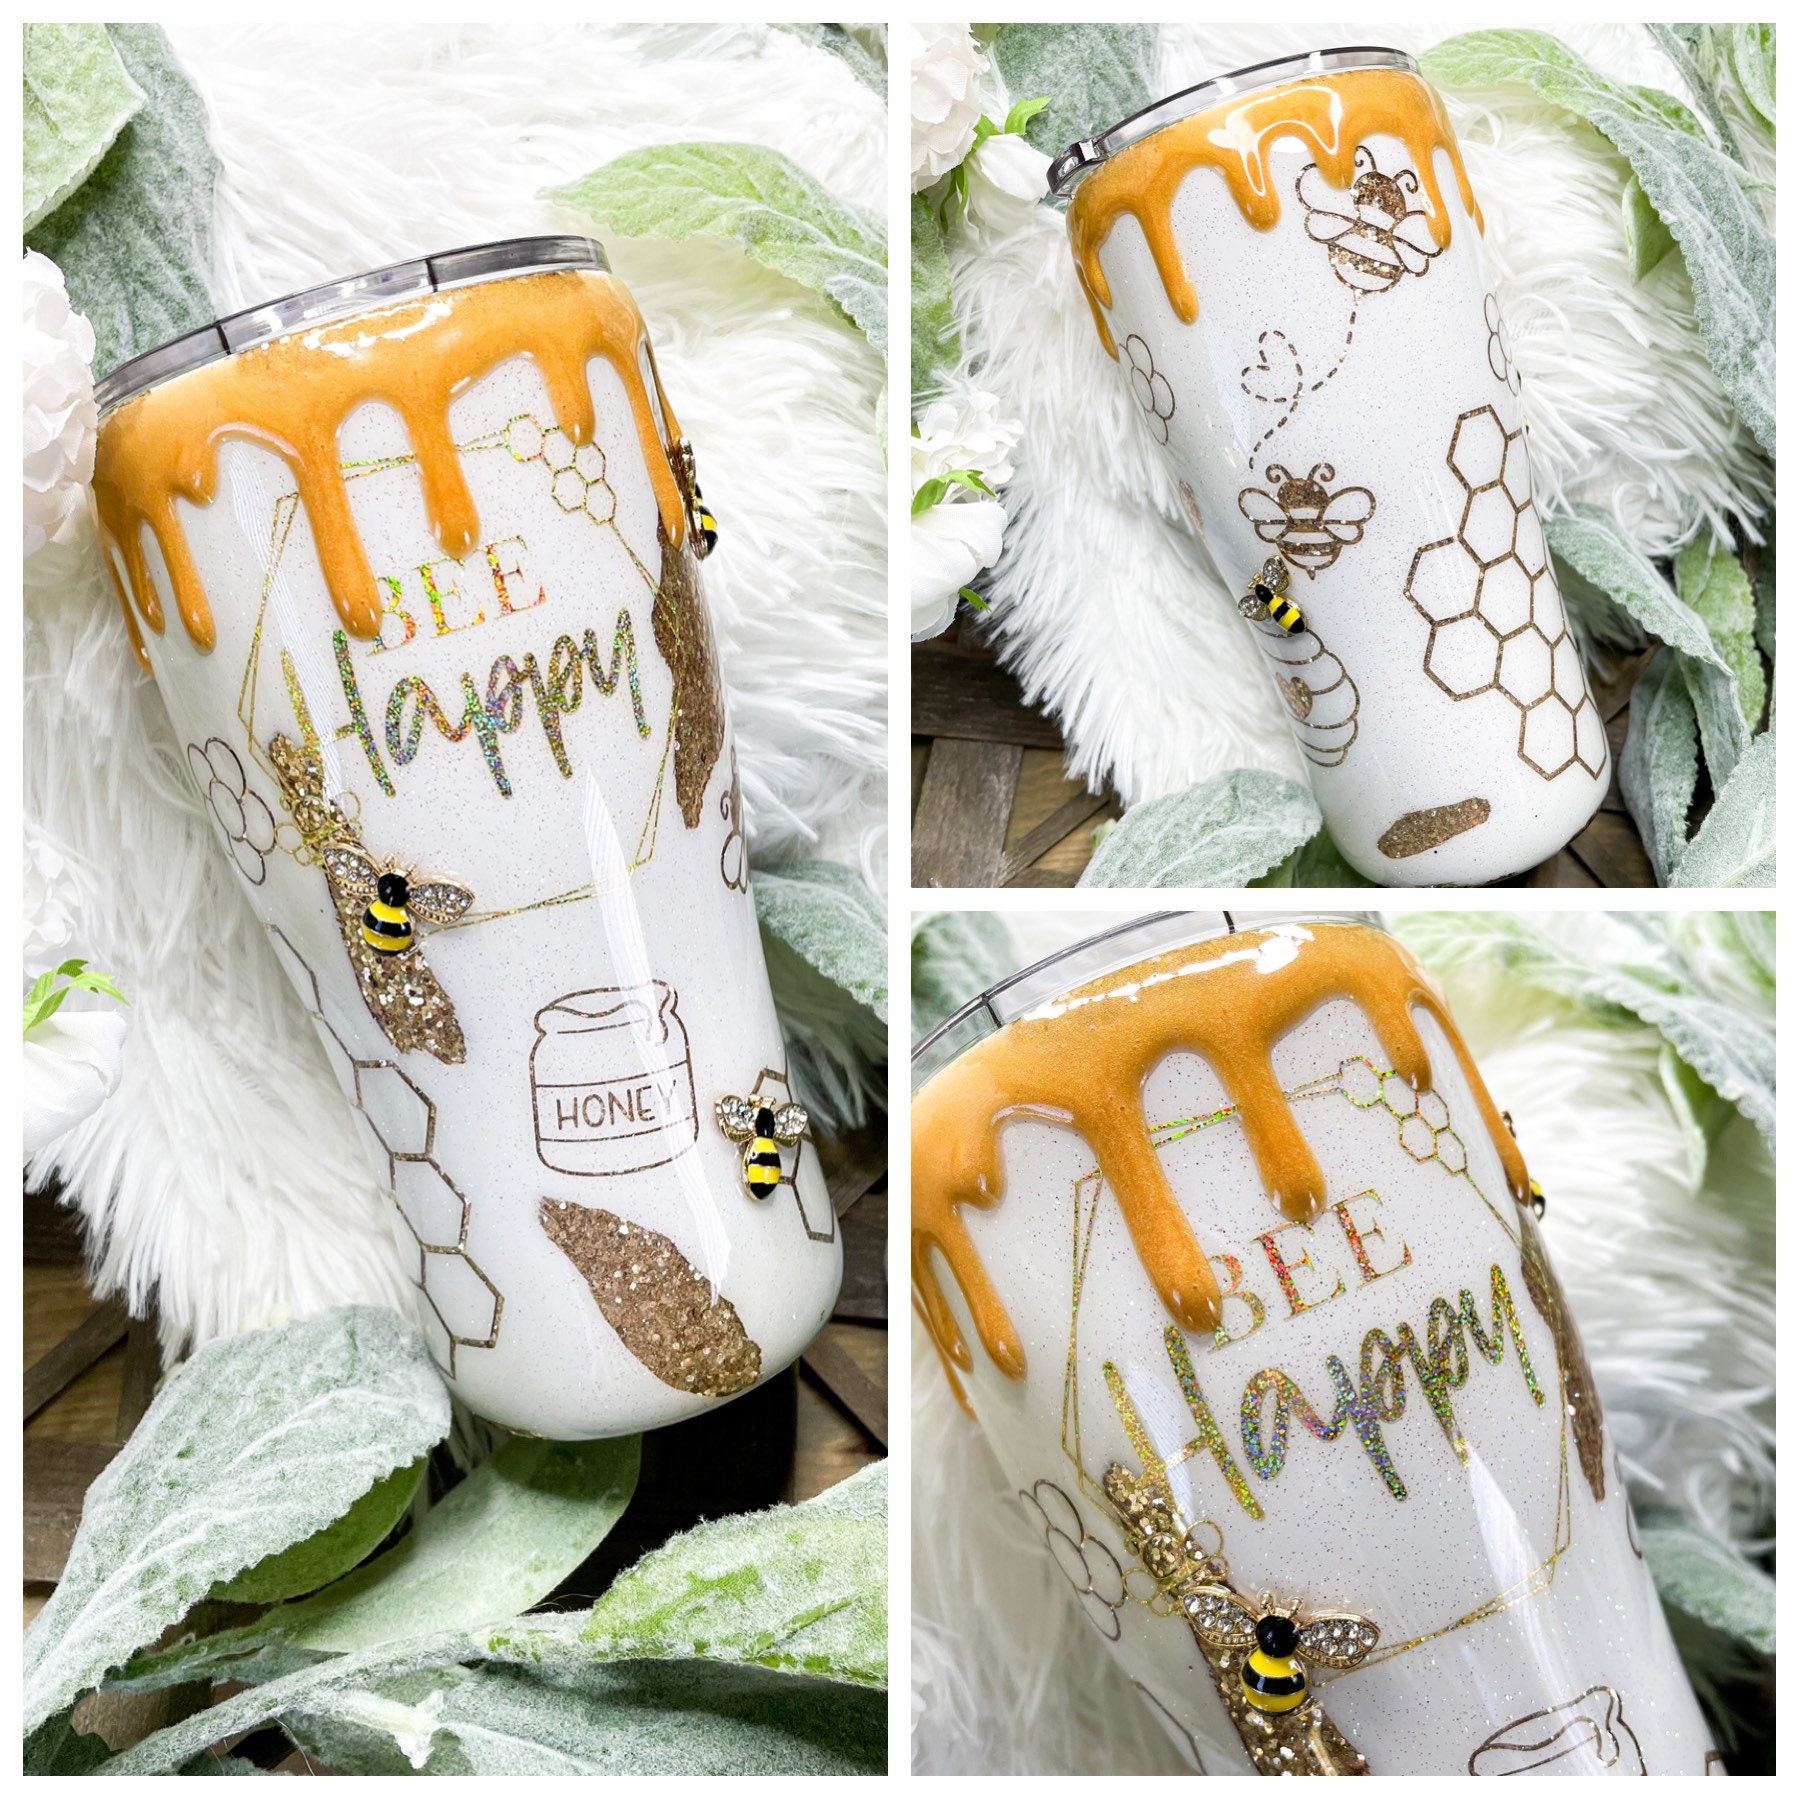 Gifts for Women - Queen Bee - Christmas Gifts for Women - Fun Birthday  Gifts for Women - Unique Gifts Ideas for Wife Sister Best Friends - 20oz  Travel